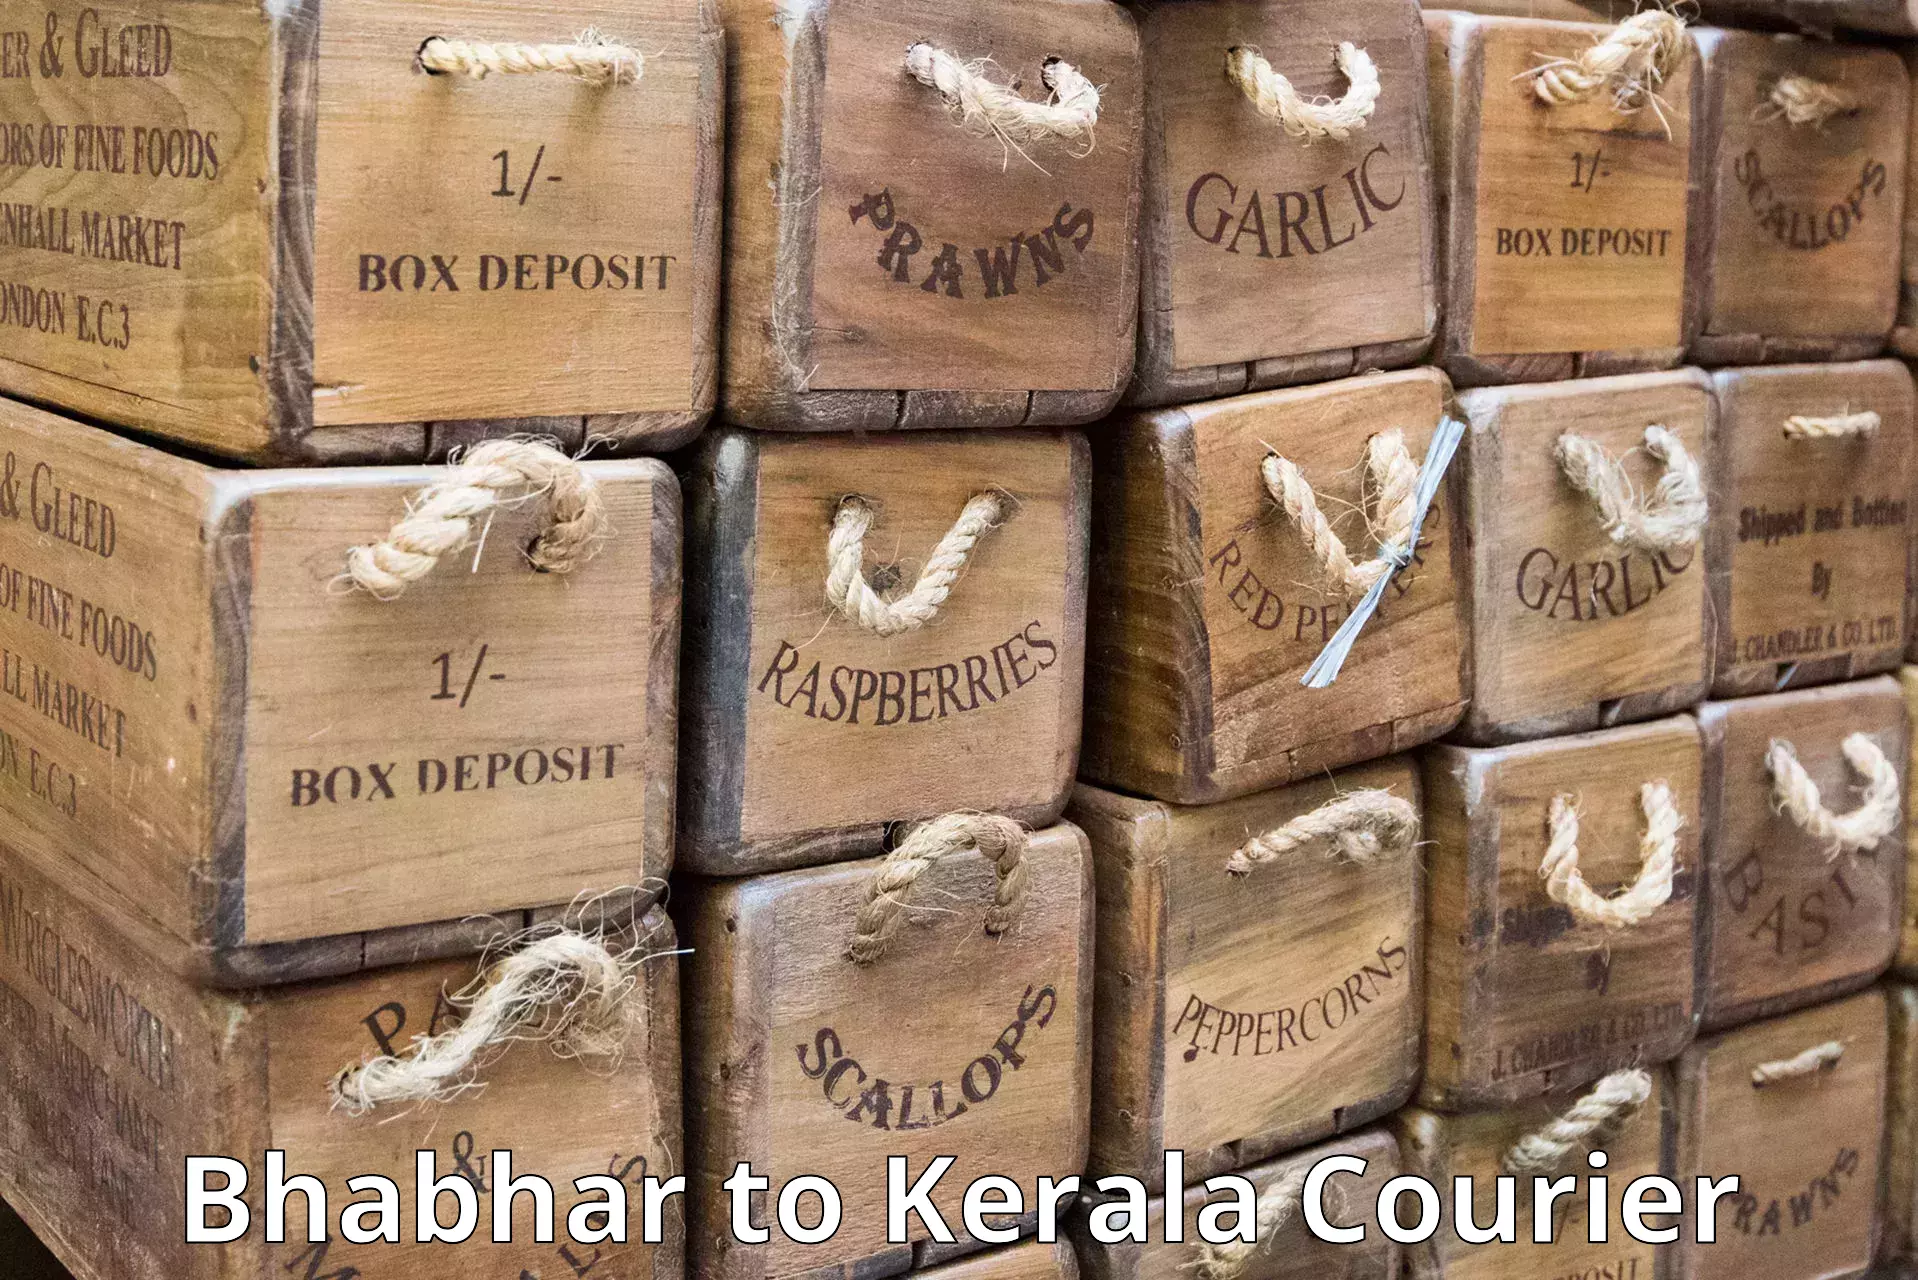 Courier service comparison Bhabhar to Ernakulam